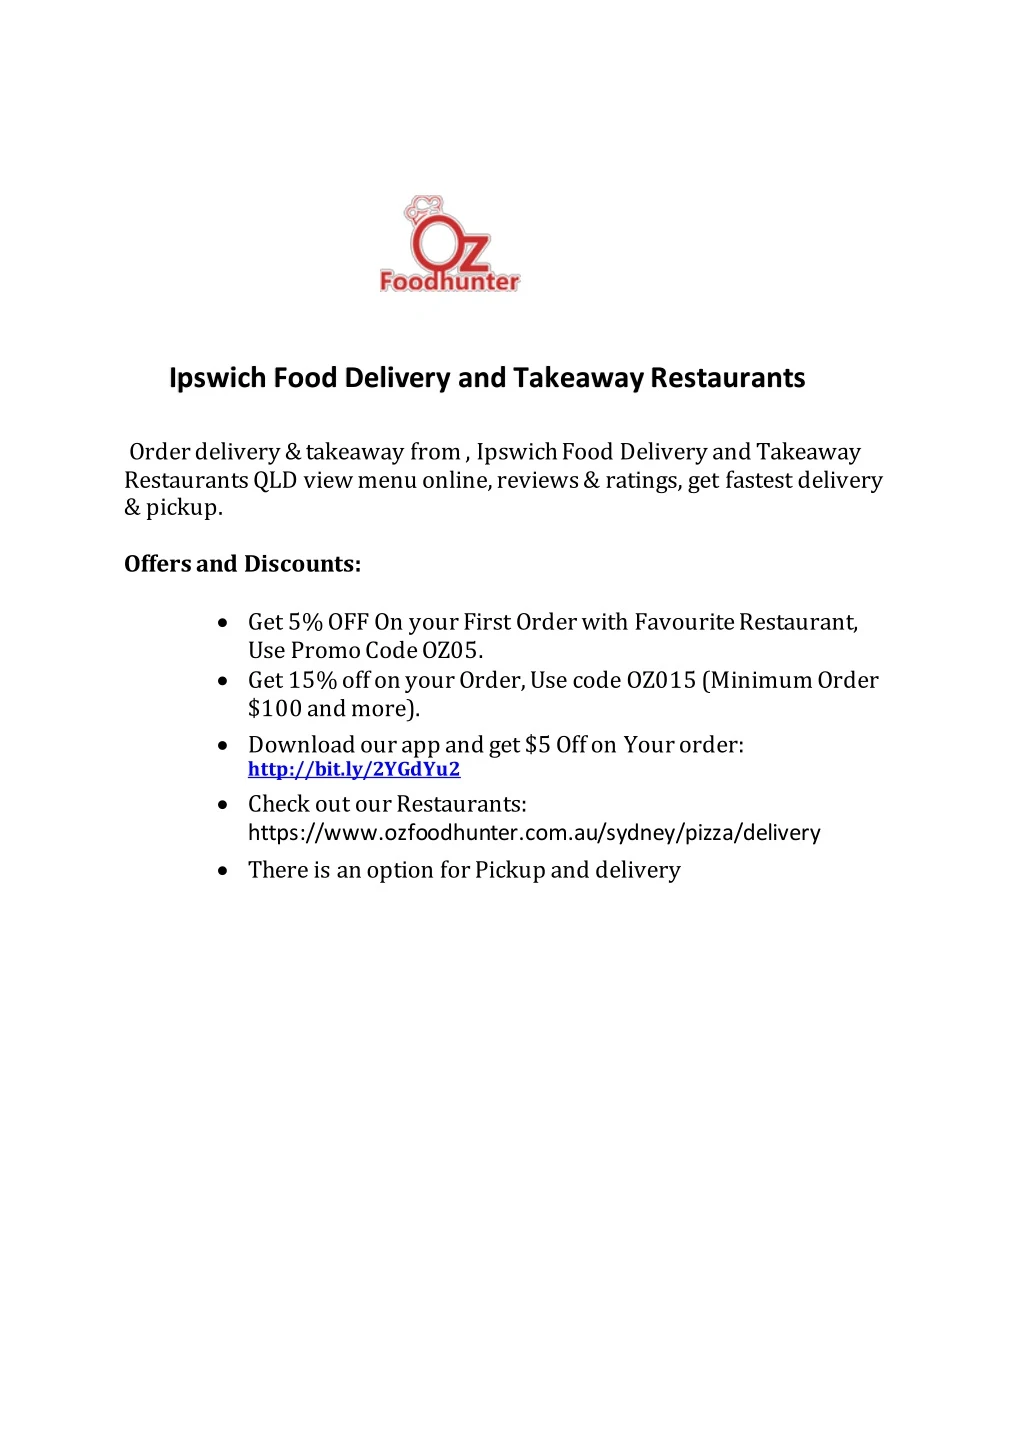 ipswich food delivery and takeaway restaurants